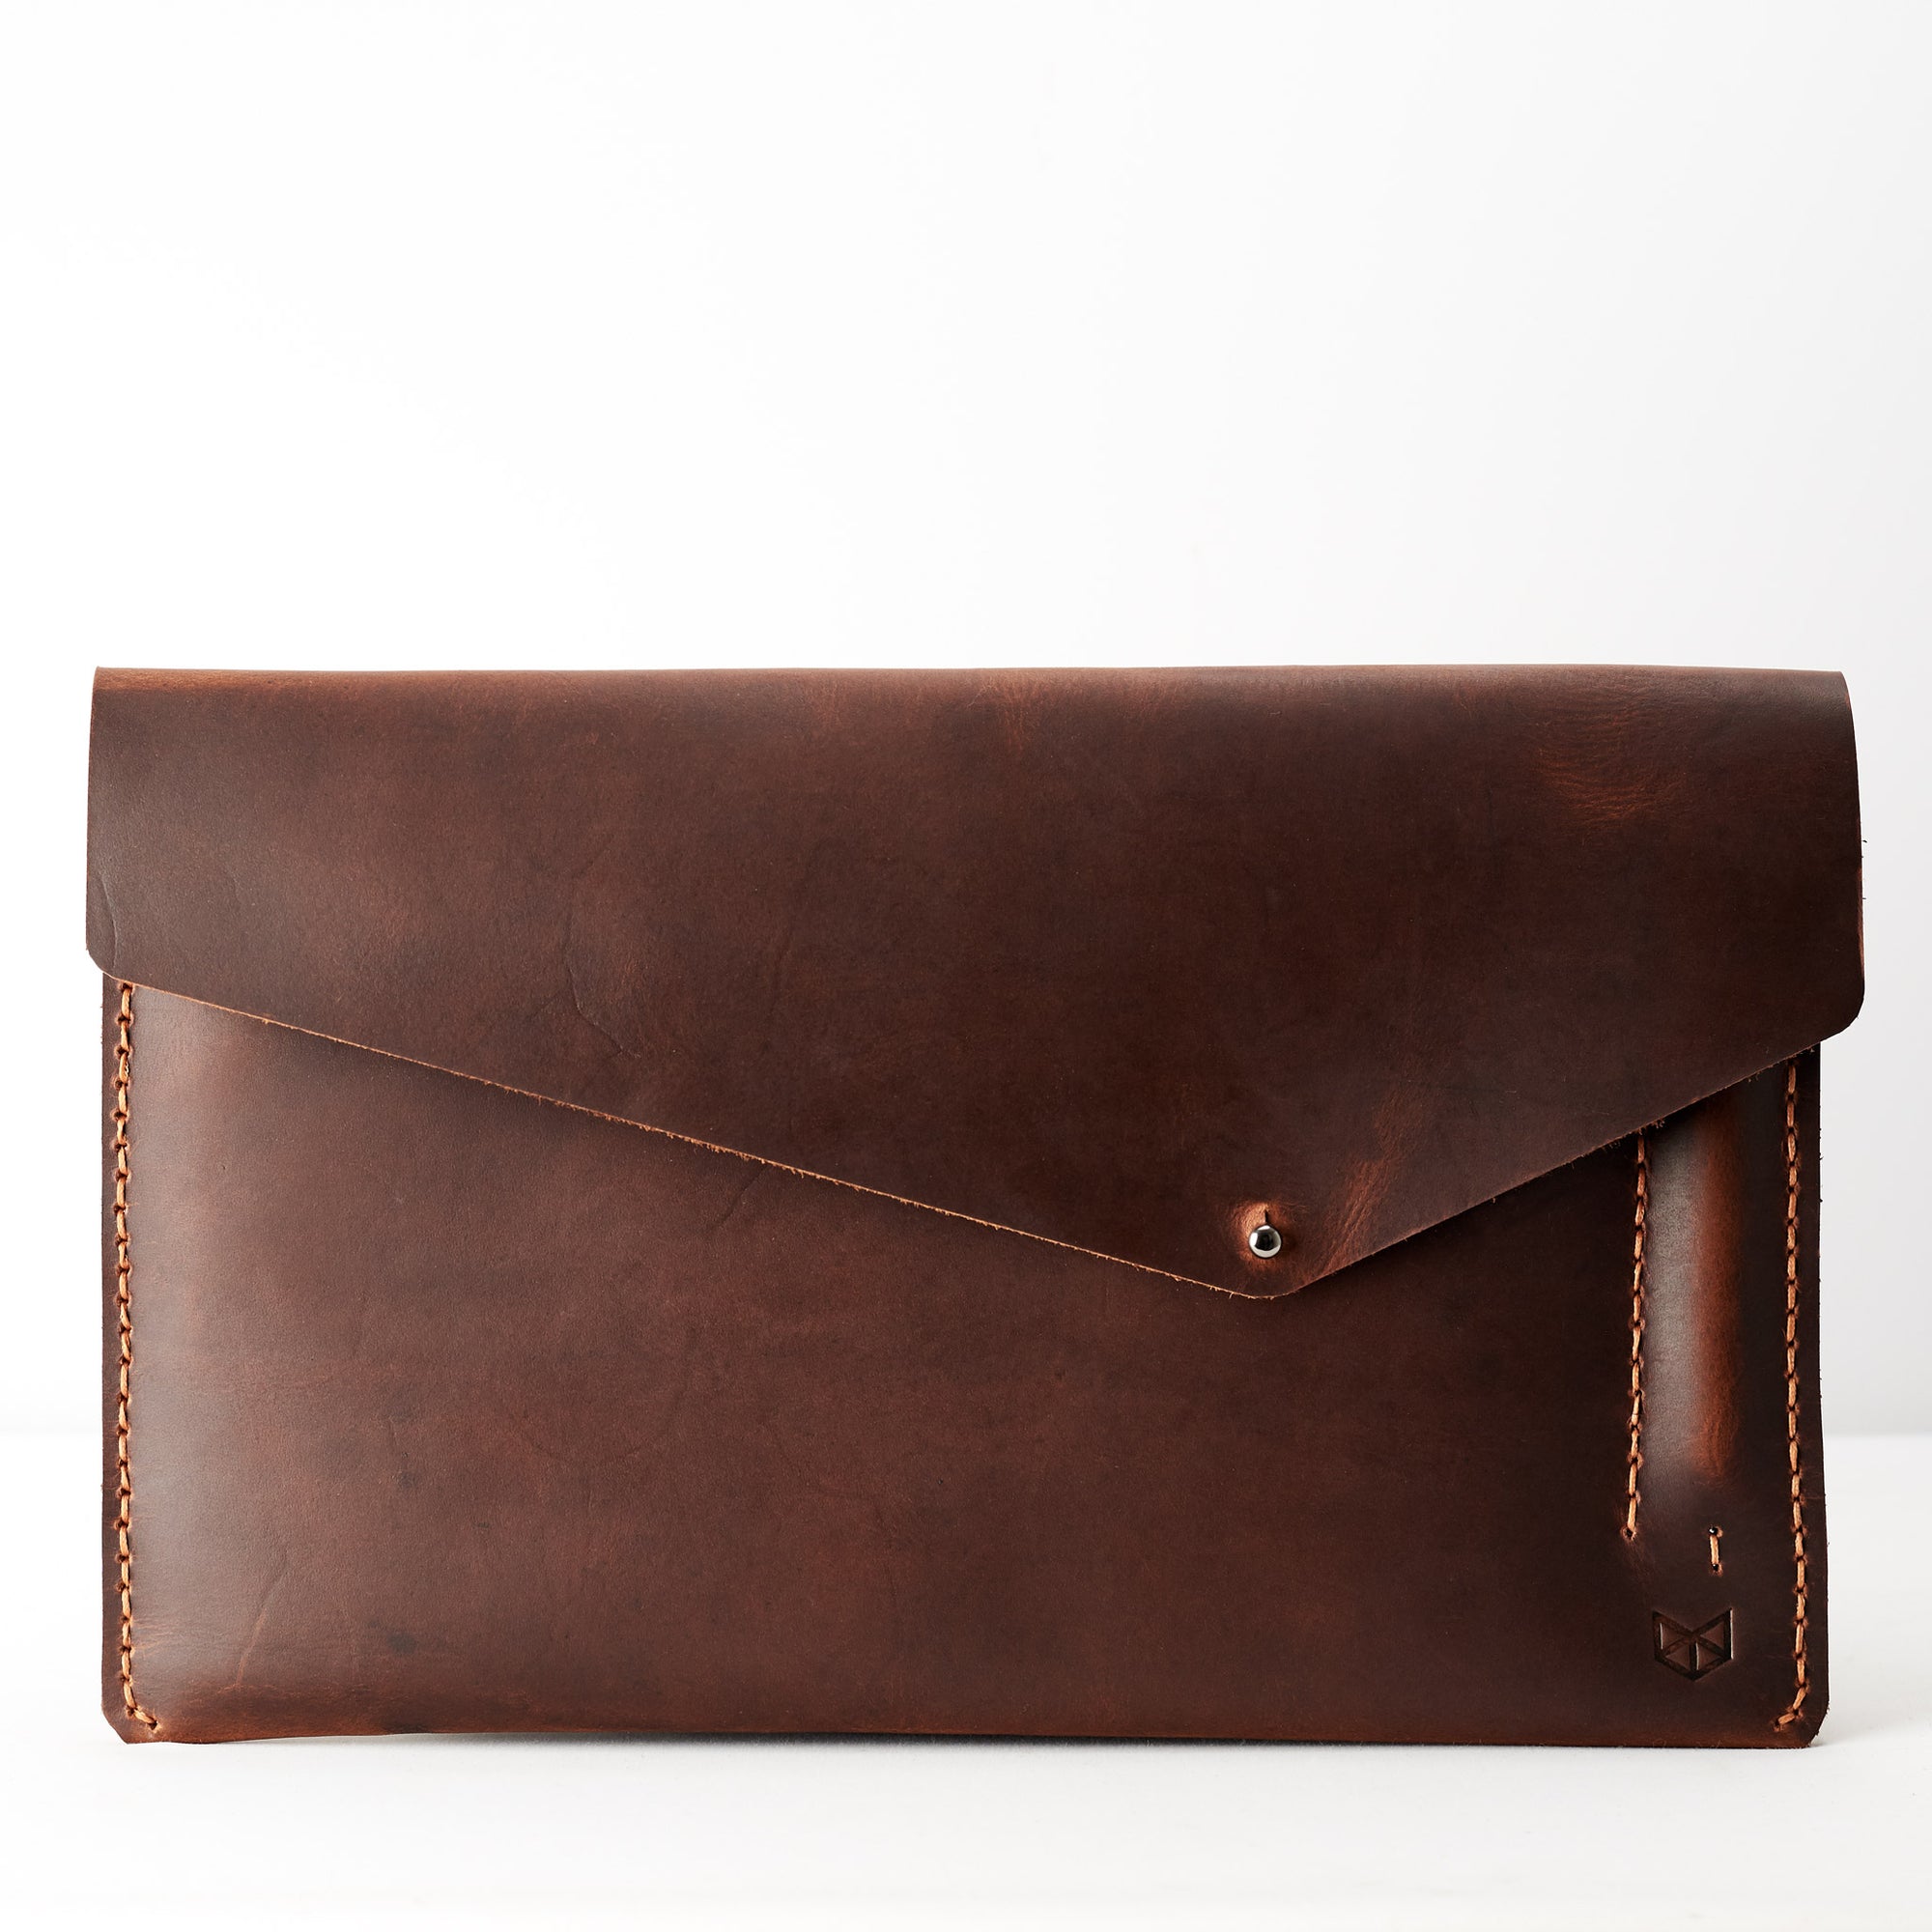 Closed. Tan leather sleeve for ASUS Zenbook Pro Duo. Mens gifts